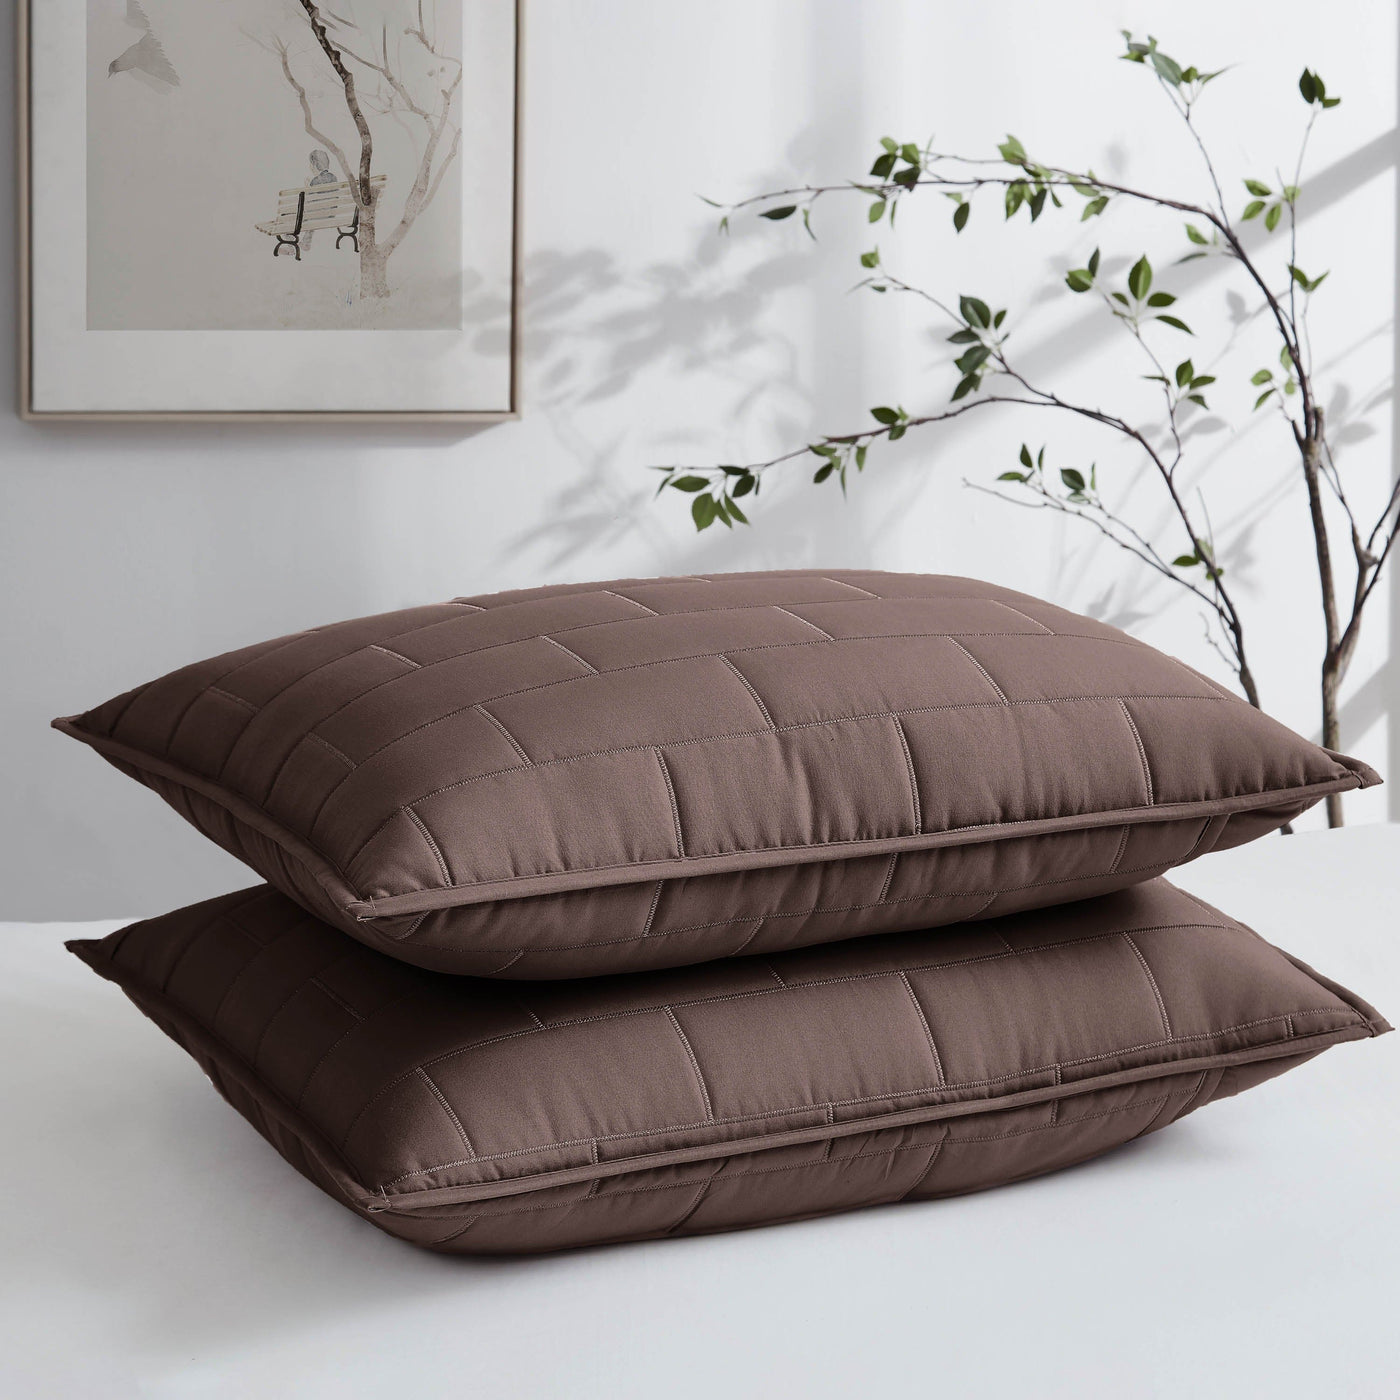  Vilano Brickyard Quilted Shams Stack in brown Stack Together#color_vilano-chocolate-brown